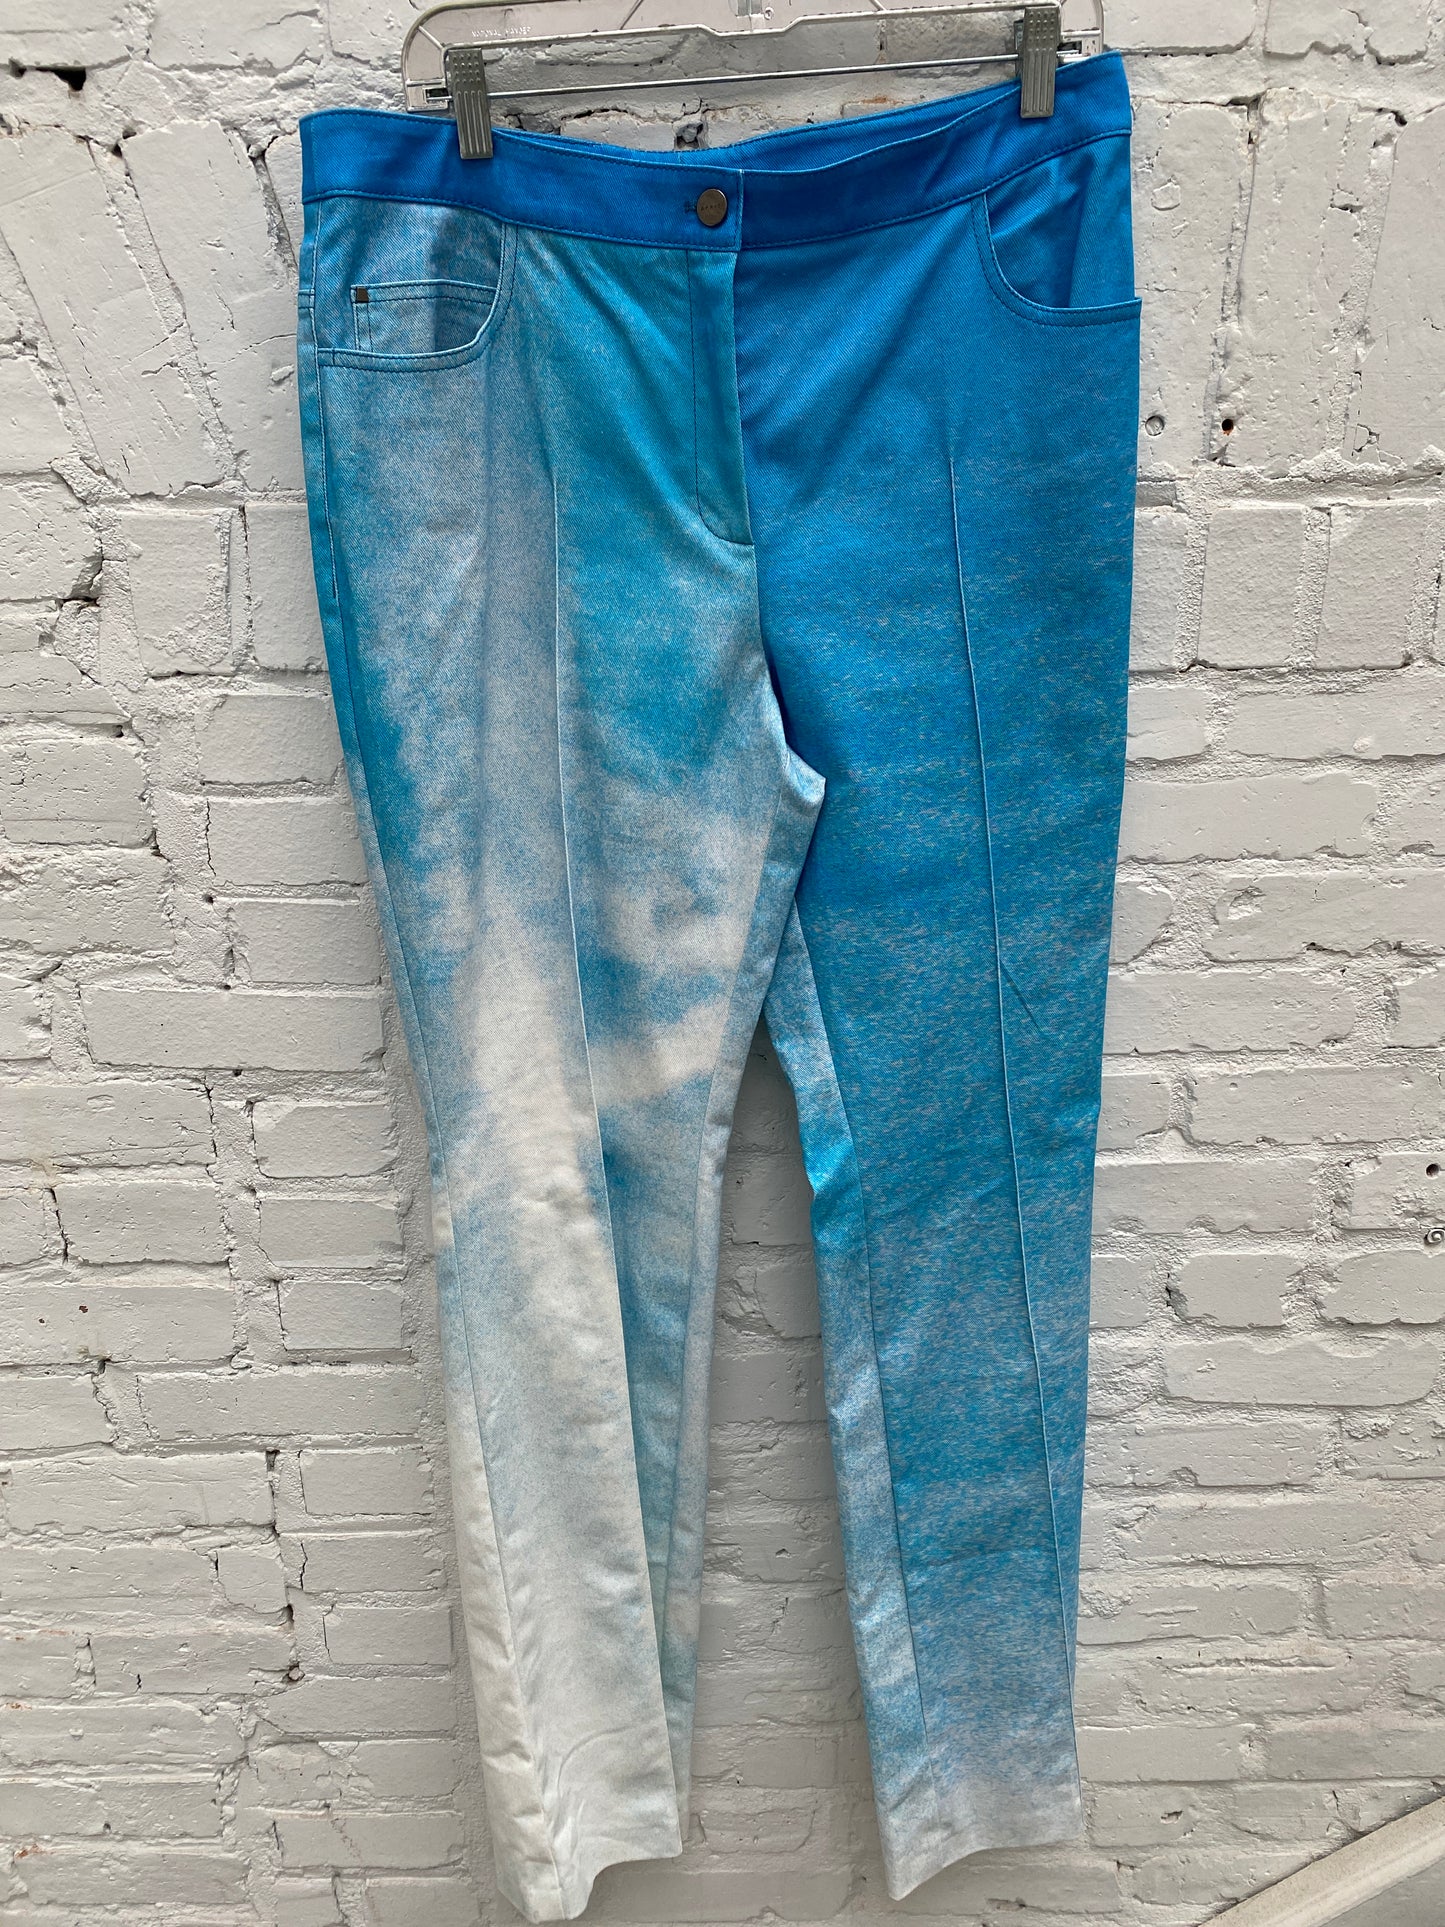 Akris Blue and White Jeans, 12